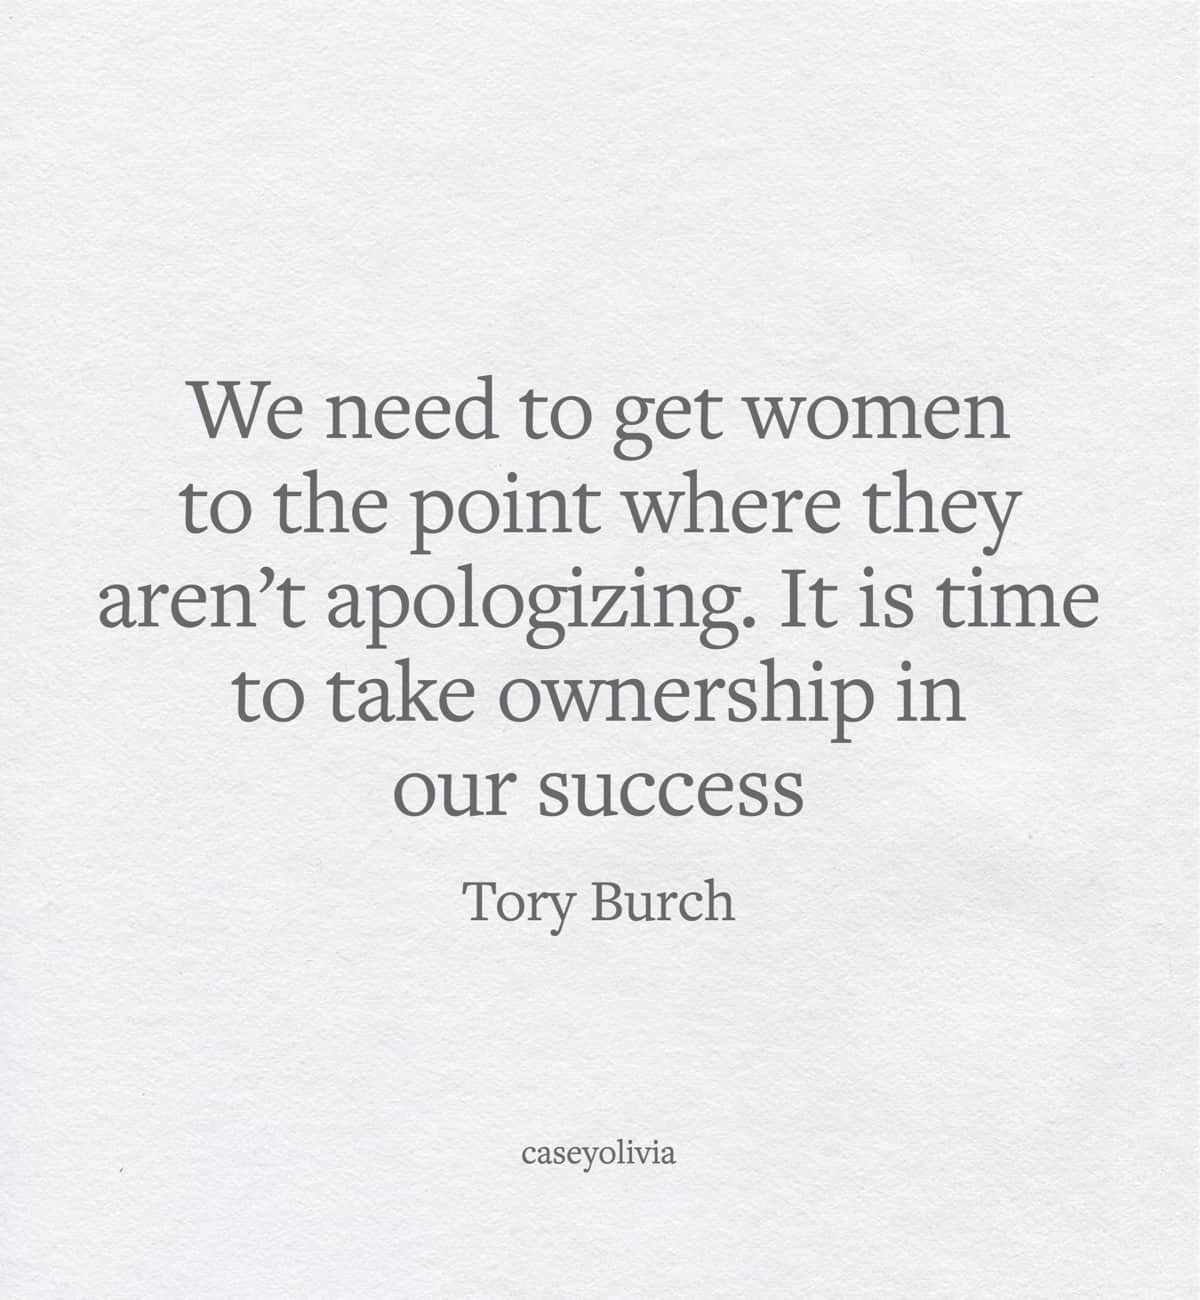 tory burch ownership in our success quote